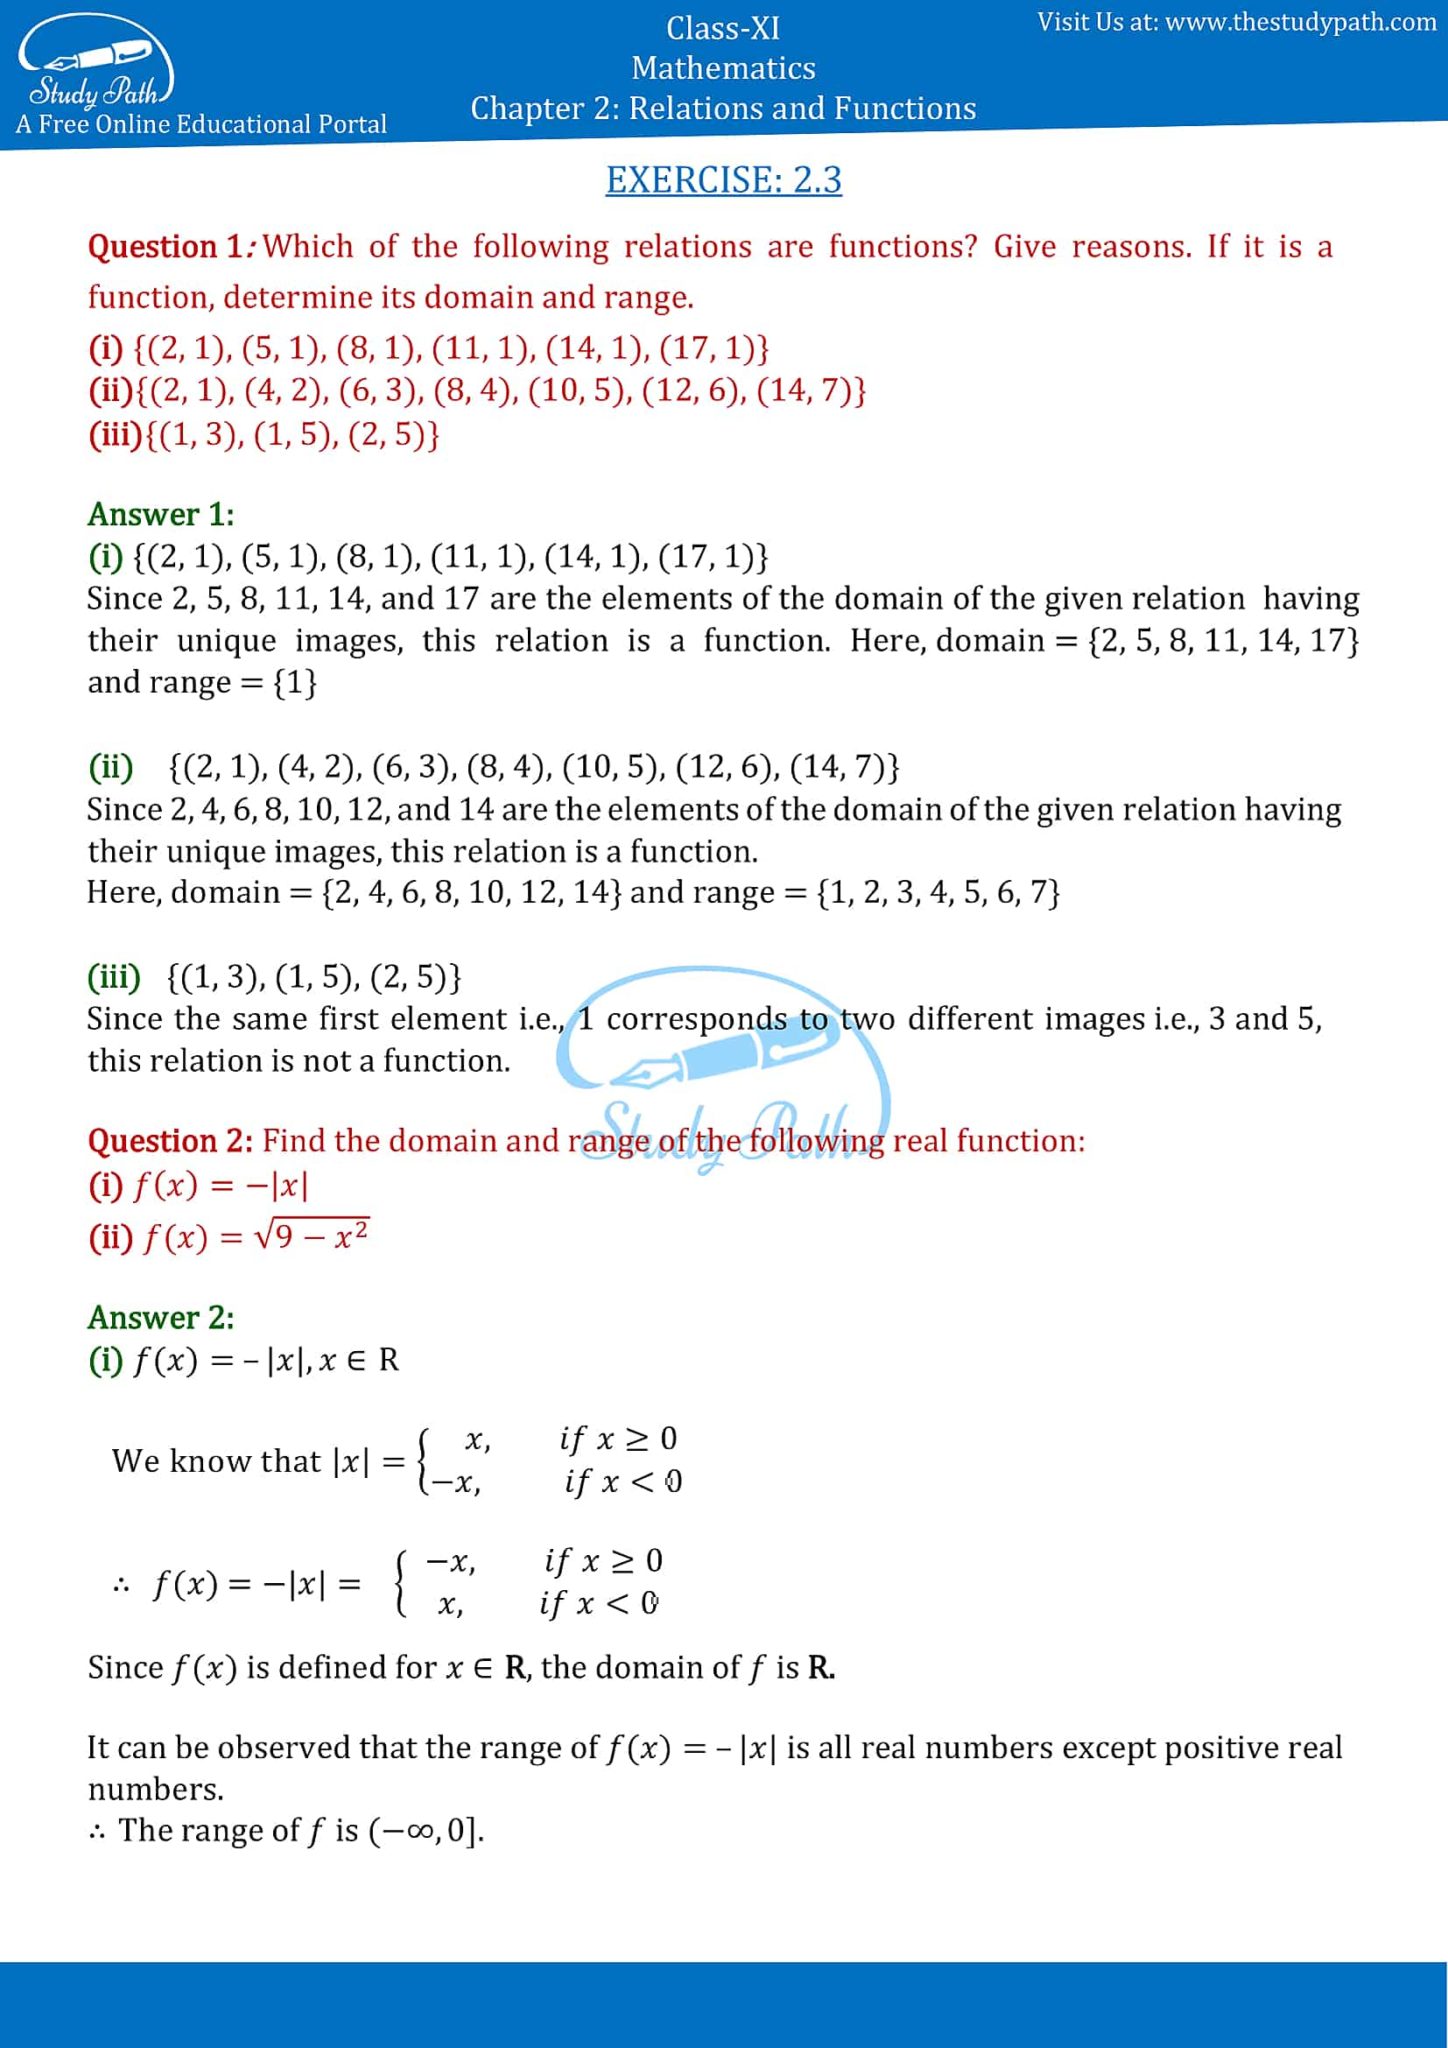 exercise 2.2 class 11 solutions